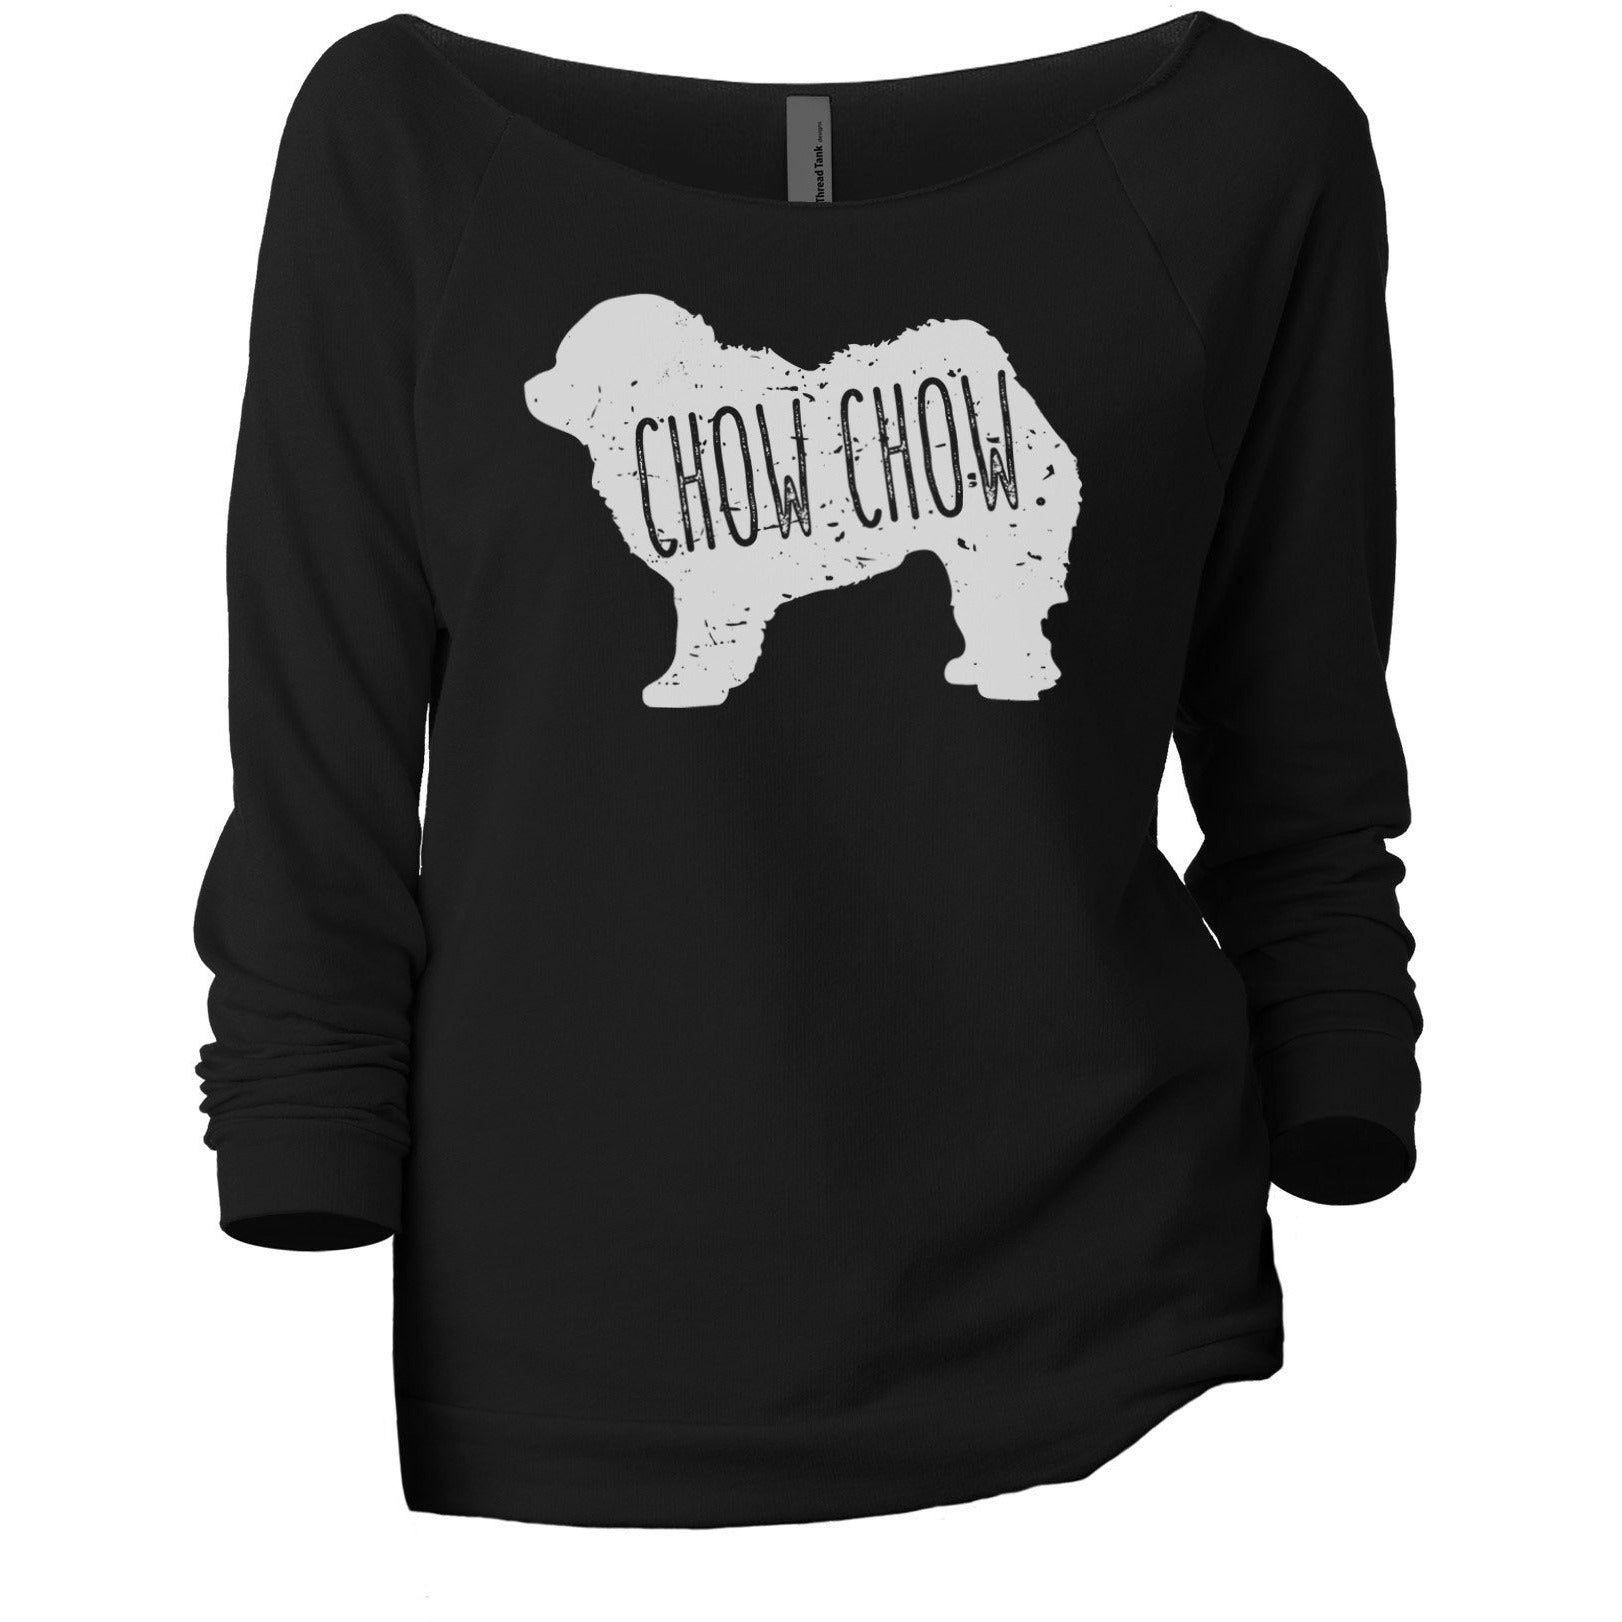 Chow Chow Dog Silhouette Women's Graphic Printed Lightweight Slouchy 3/4 Sleeves Sweatshirt Black